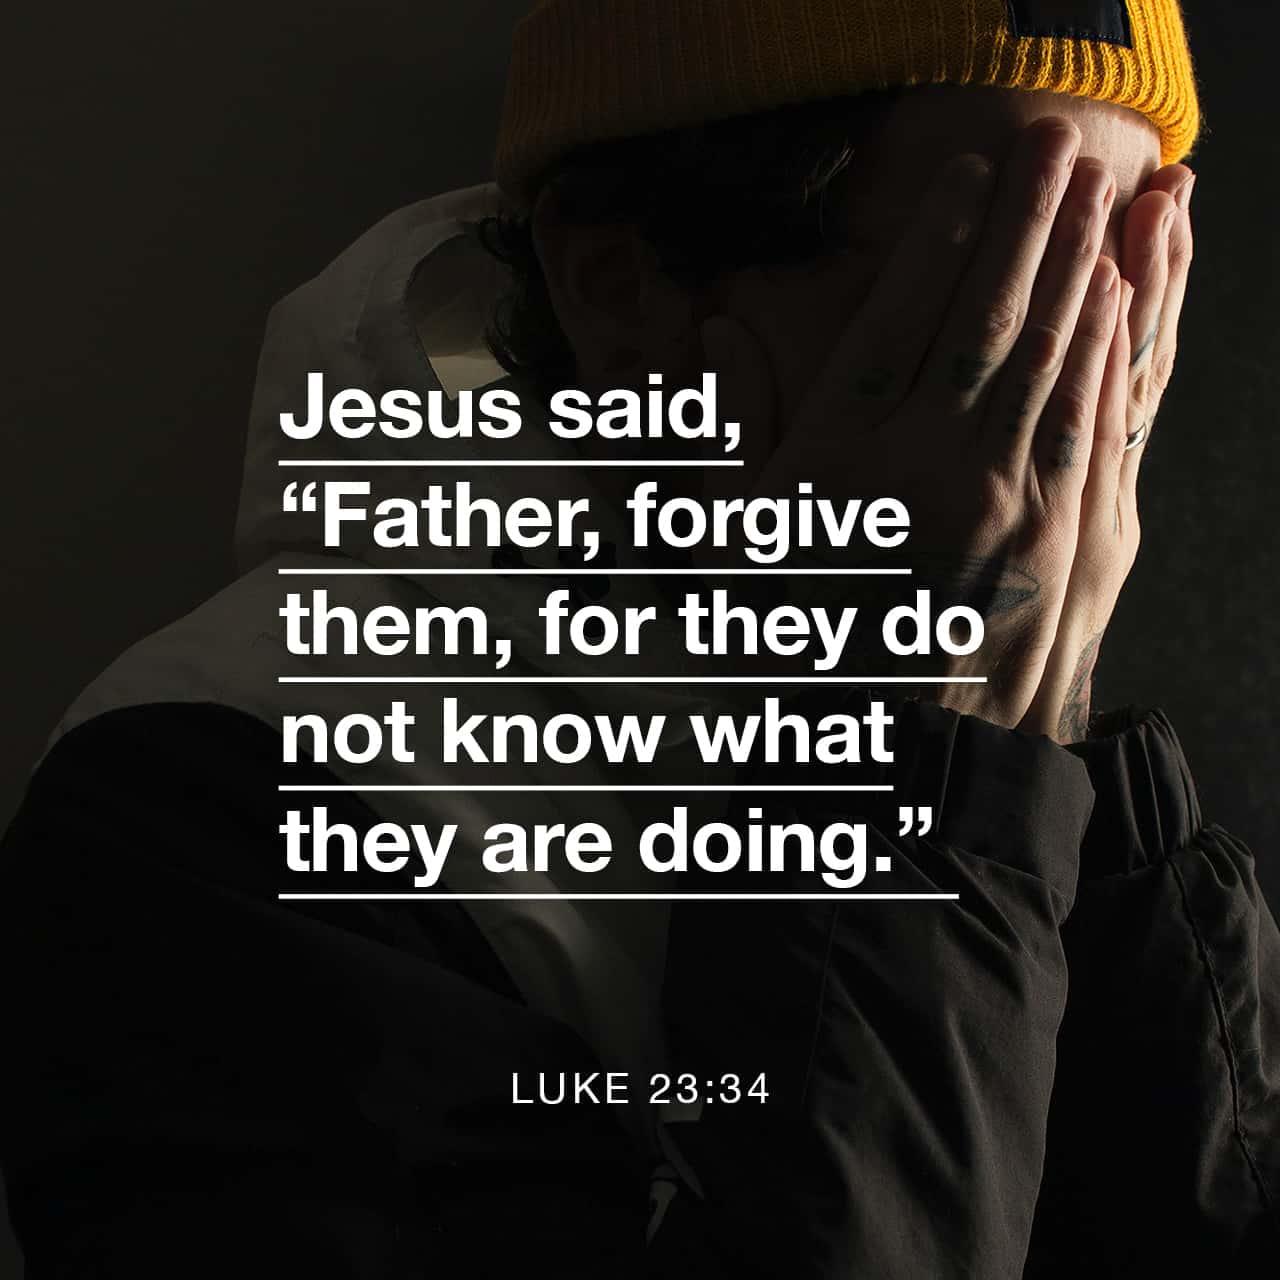 Luke 23:34-46 While they were nailing Jesus to the cross, he prayed over  and over, “Father, forgive them, for they don't know what they're doing.”  The soldiers, after they crucified him, gambled